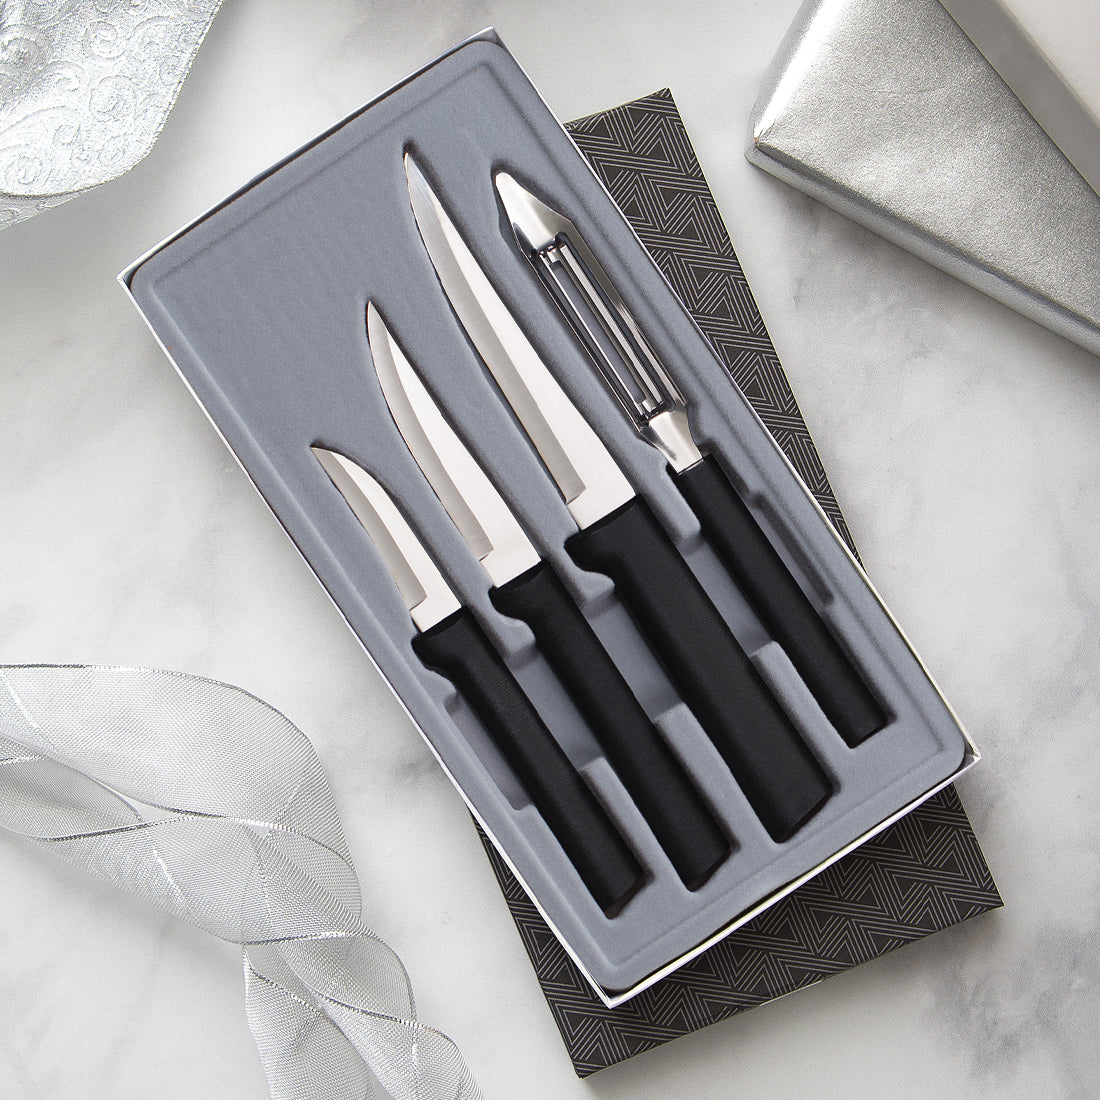 Rada Cutlery - People are constantly SEARCHING FOR the quality and  dependability of USA-made products. Your group can provide them through a Rada  Cutlery Fundraiser!